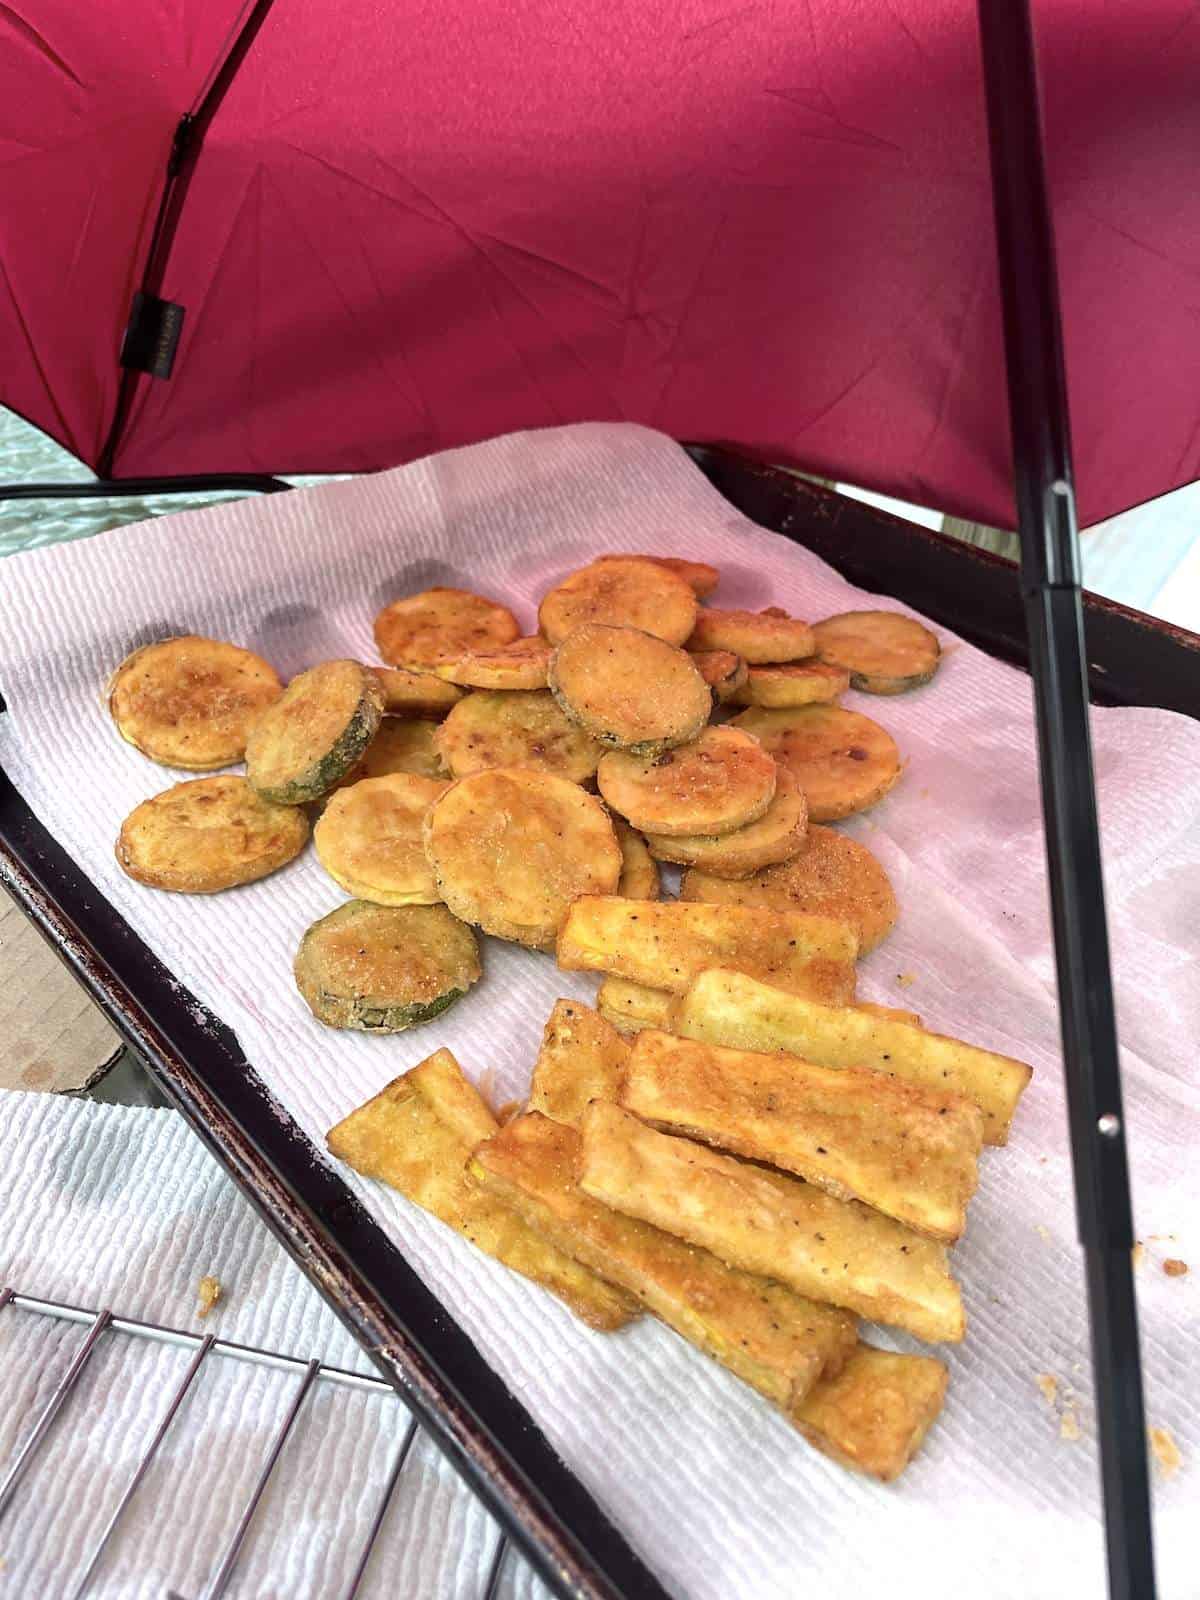 Fried squash slices and strips on a paper towel with an umbrella covering them.